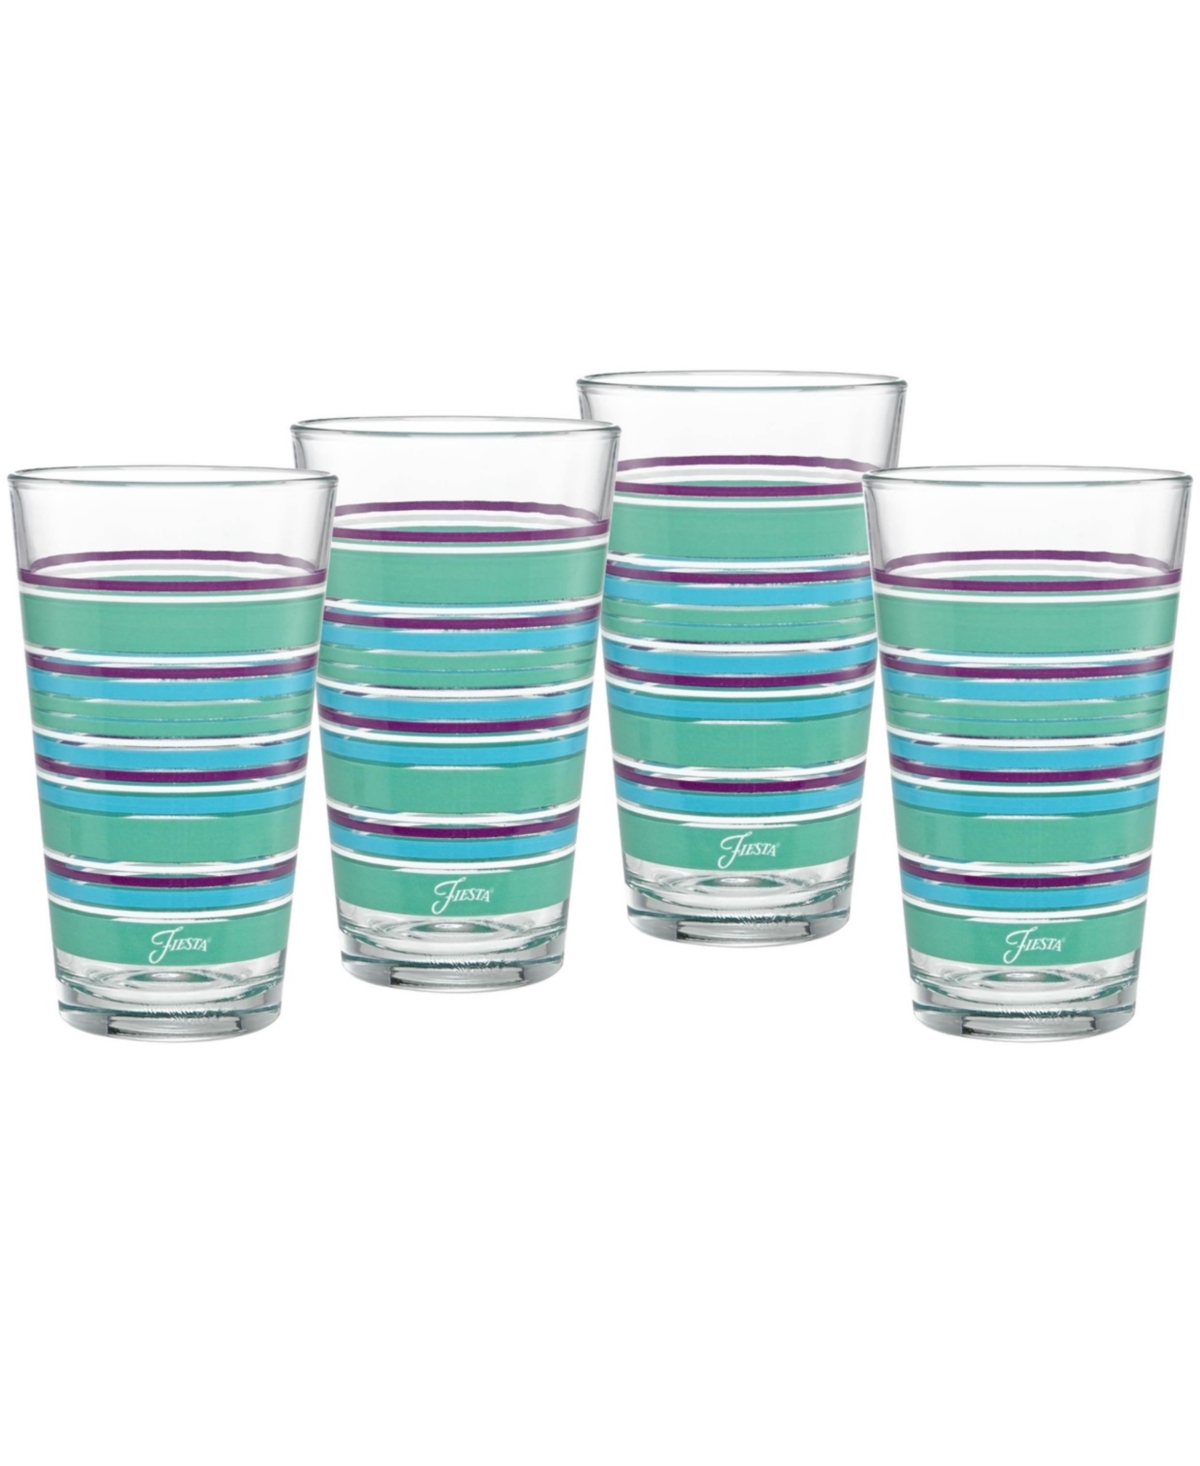 FIESTA FARMHOUSE CHIC STRIPES 16-OUNCE TAPERED COOLER GLASS SET OF 4